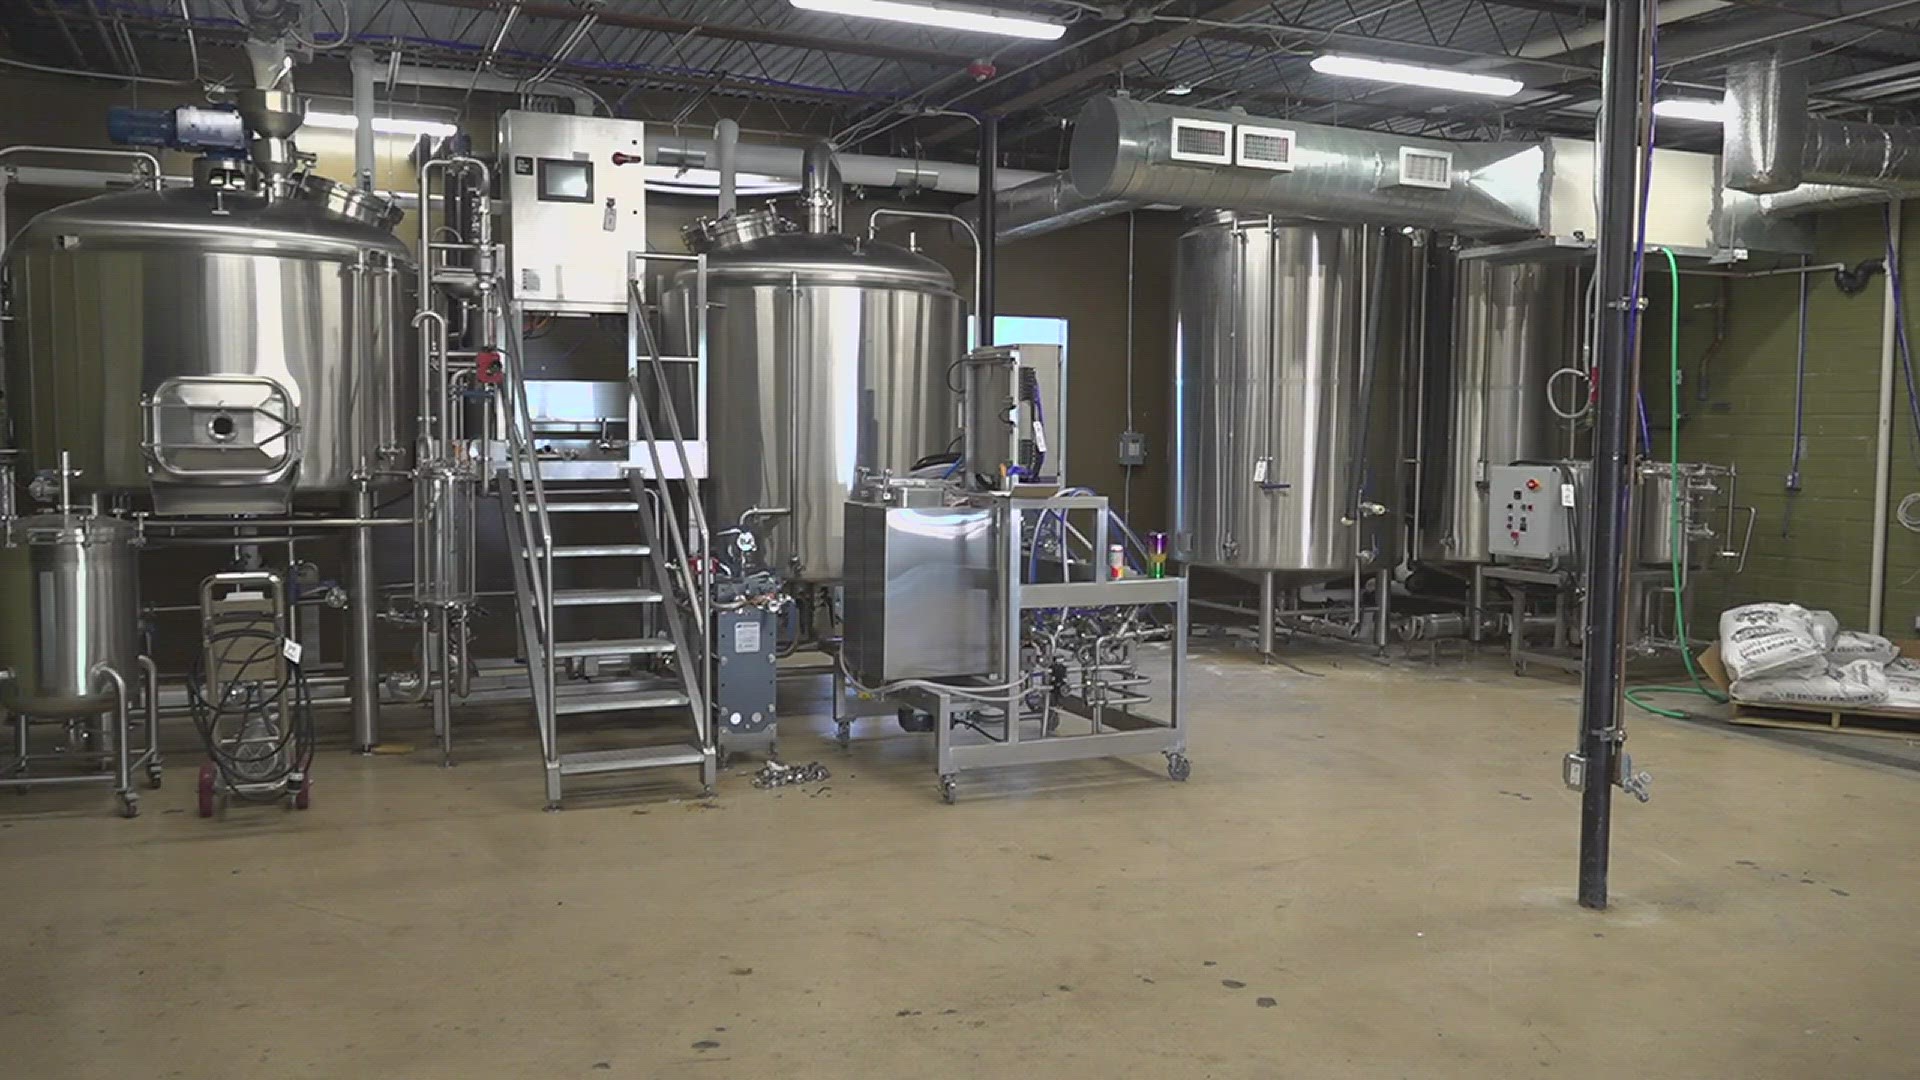 When asked if the old Pour Brothers Brewery location will be open for the public to grab a beer, Neches Brewing Company Owner Tyler Blount says only time will tell.